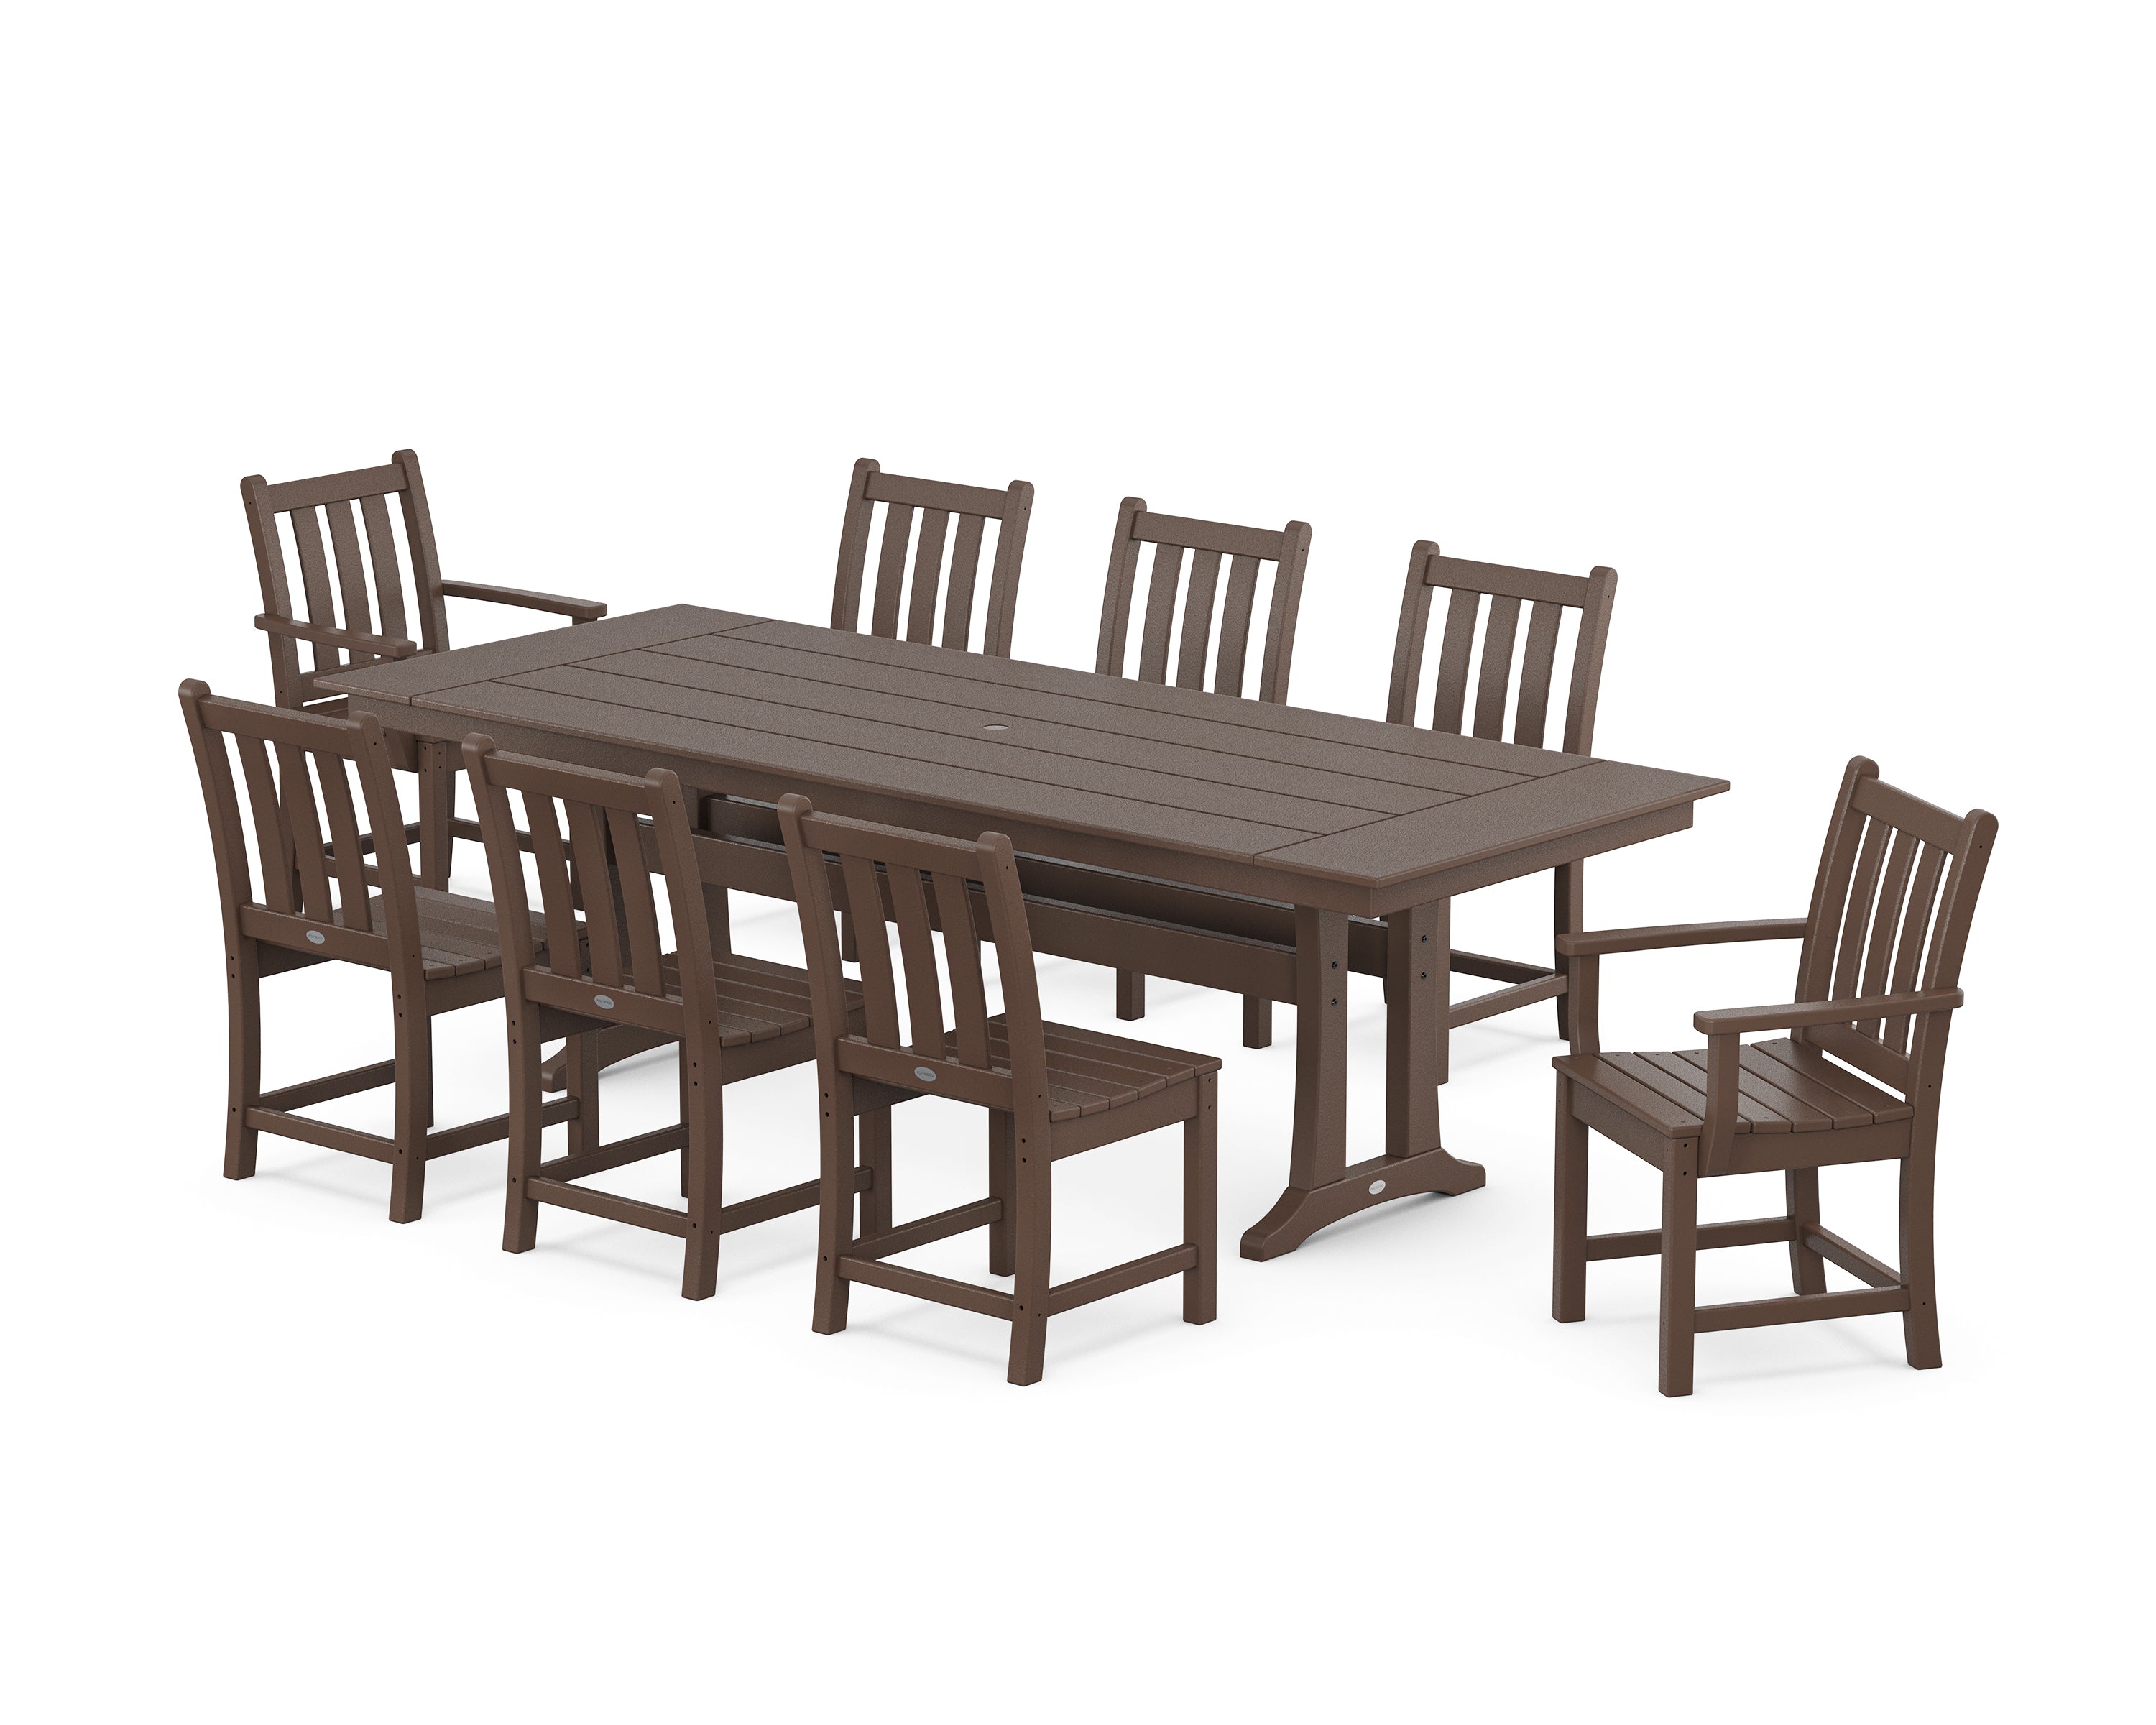 POLYWOOD® Traditional Garden 9-Piece Farmhouse Dining Set with Trestle Legs in Mahogany